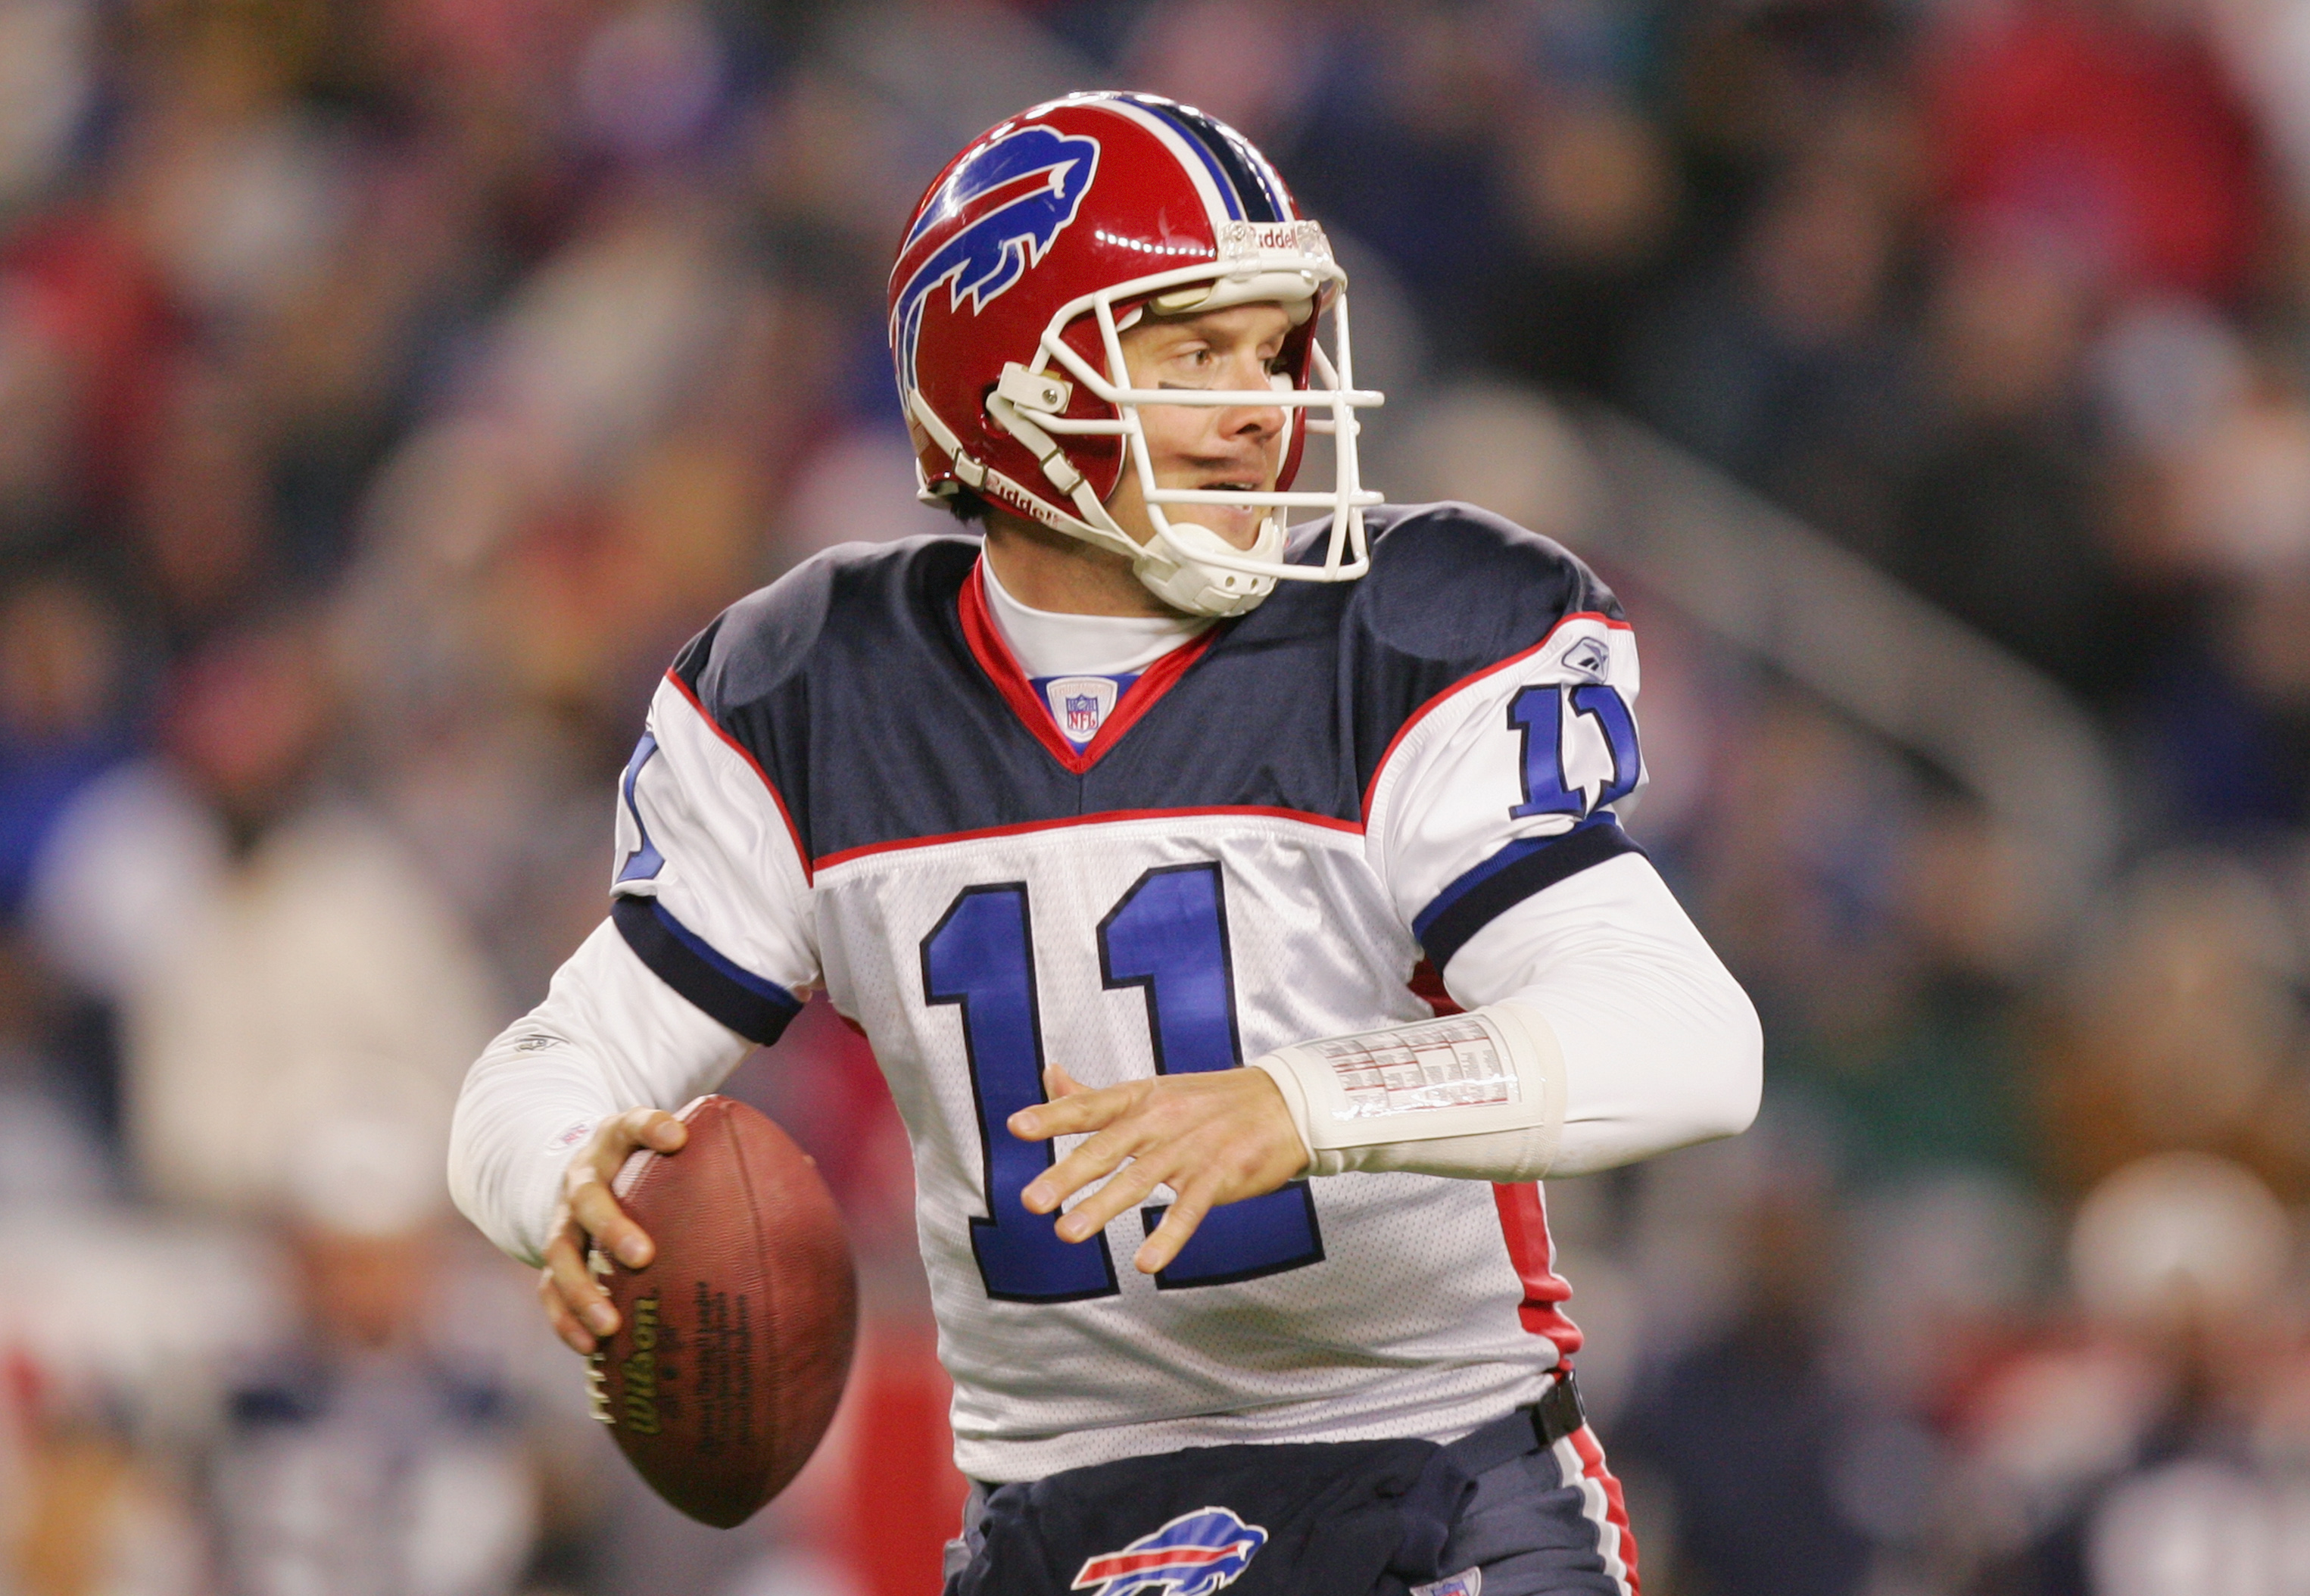 FOXBORO, MA - NOVEMBER 14:  Quarterback Drew Bledsoe #11 of the Buffalo Bills passes the ball against the New England Patriots during the game at Gillette Stadium on November 14, 2004 in Foxboro, Massachusetts. The Patriots defeated the Bills 29-6.  (Phot